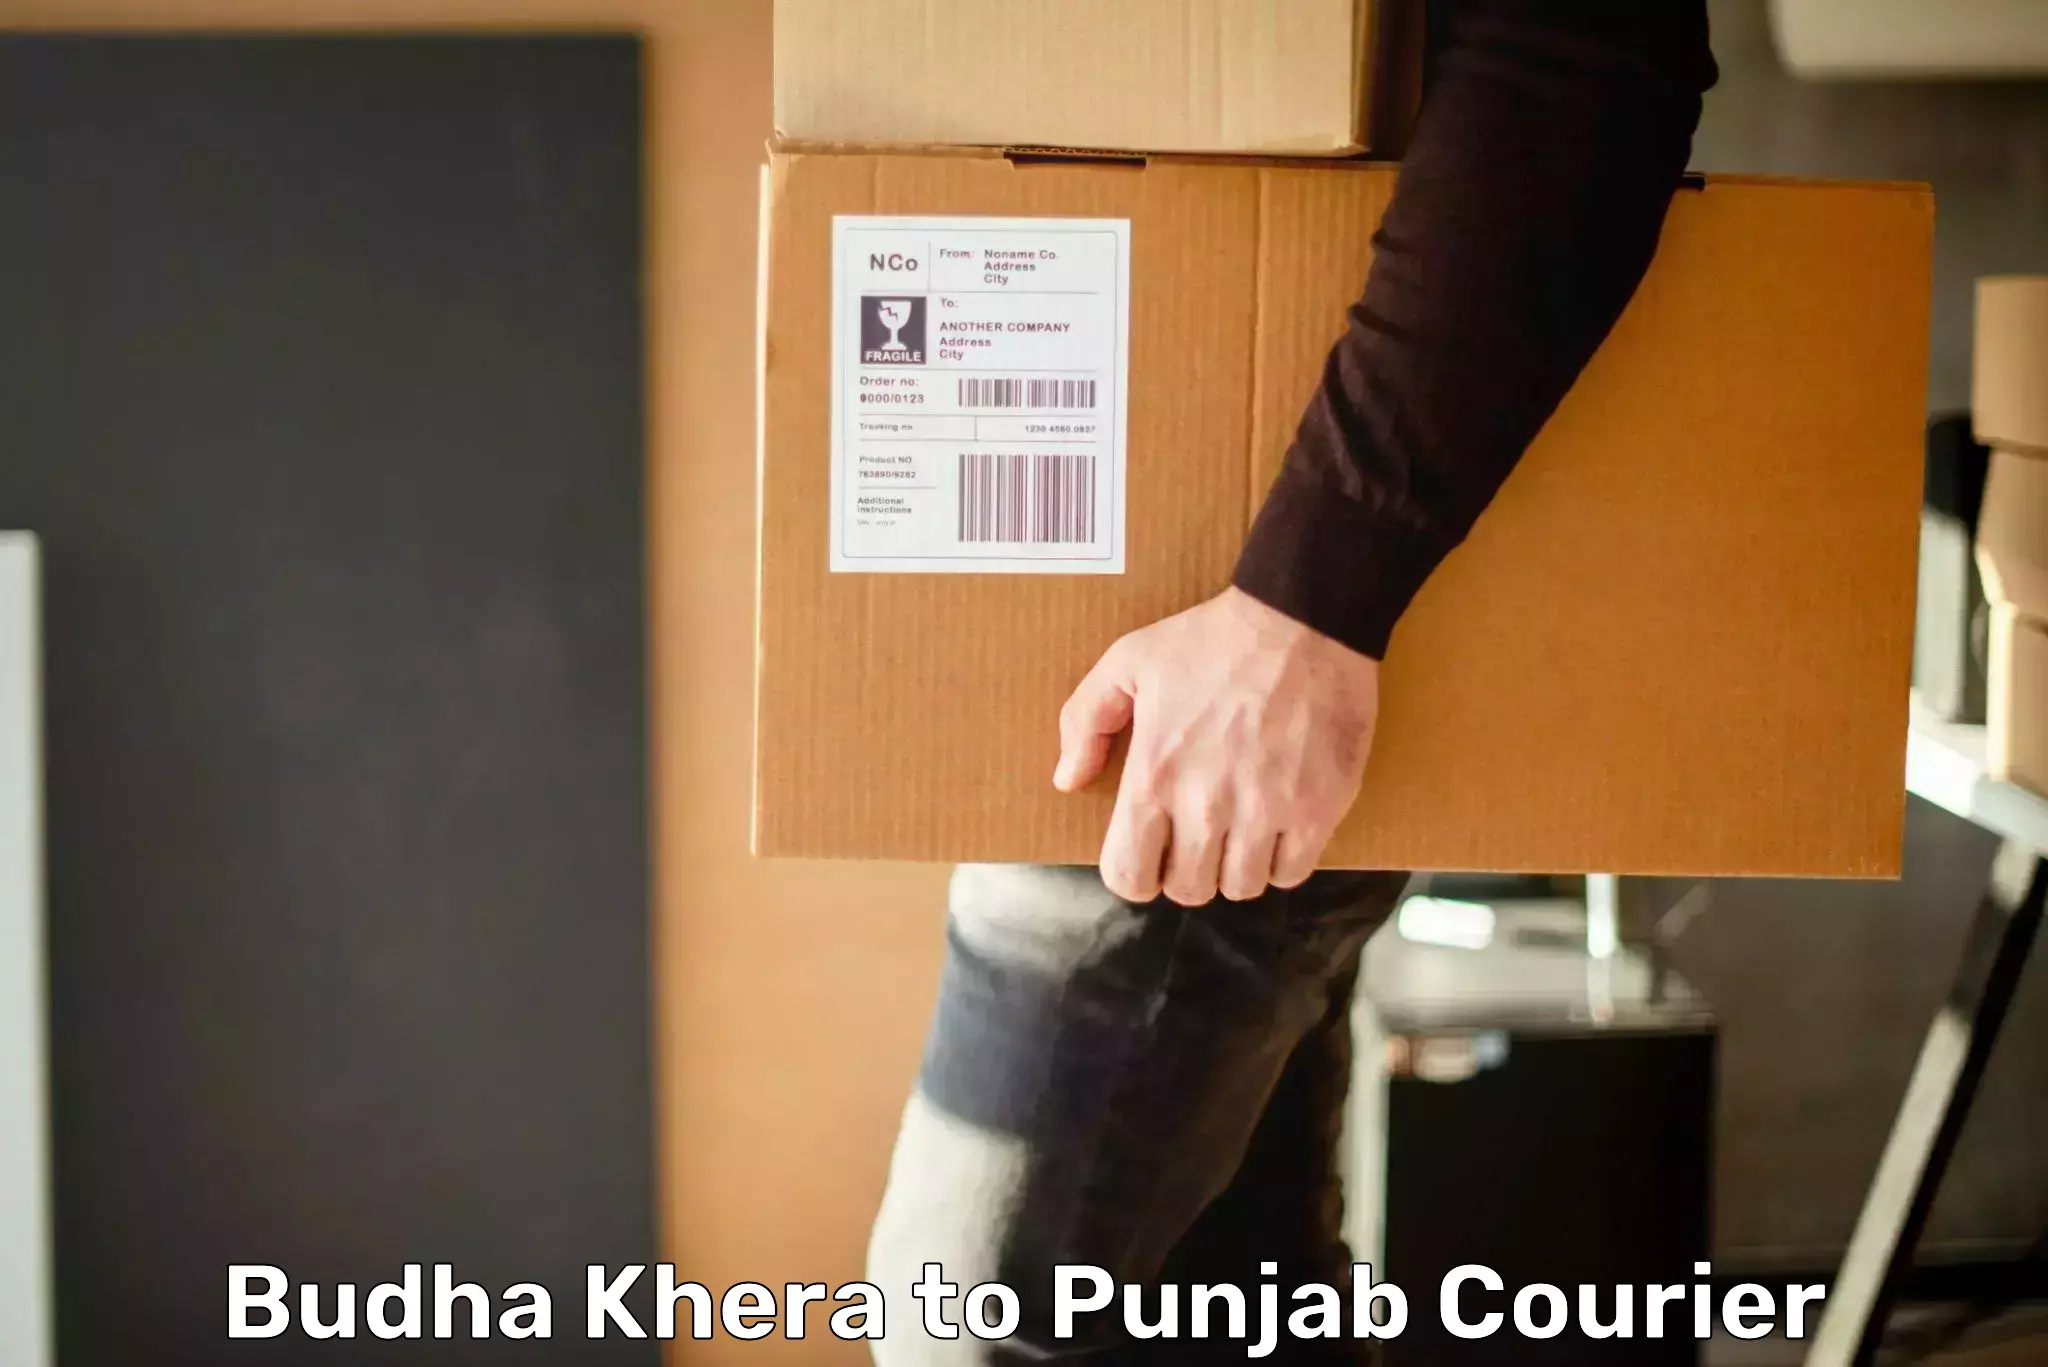 User-friendly delivery service Budha Khera to Dhilwan